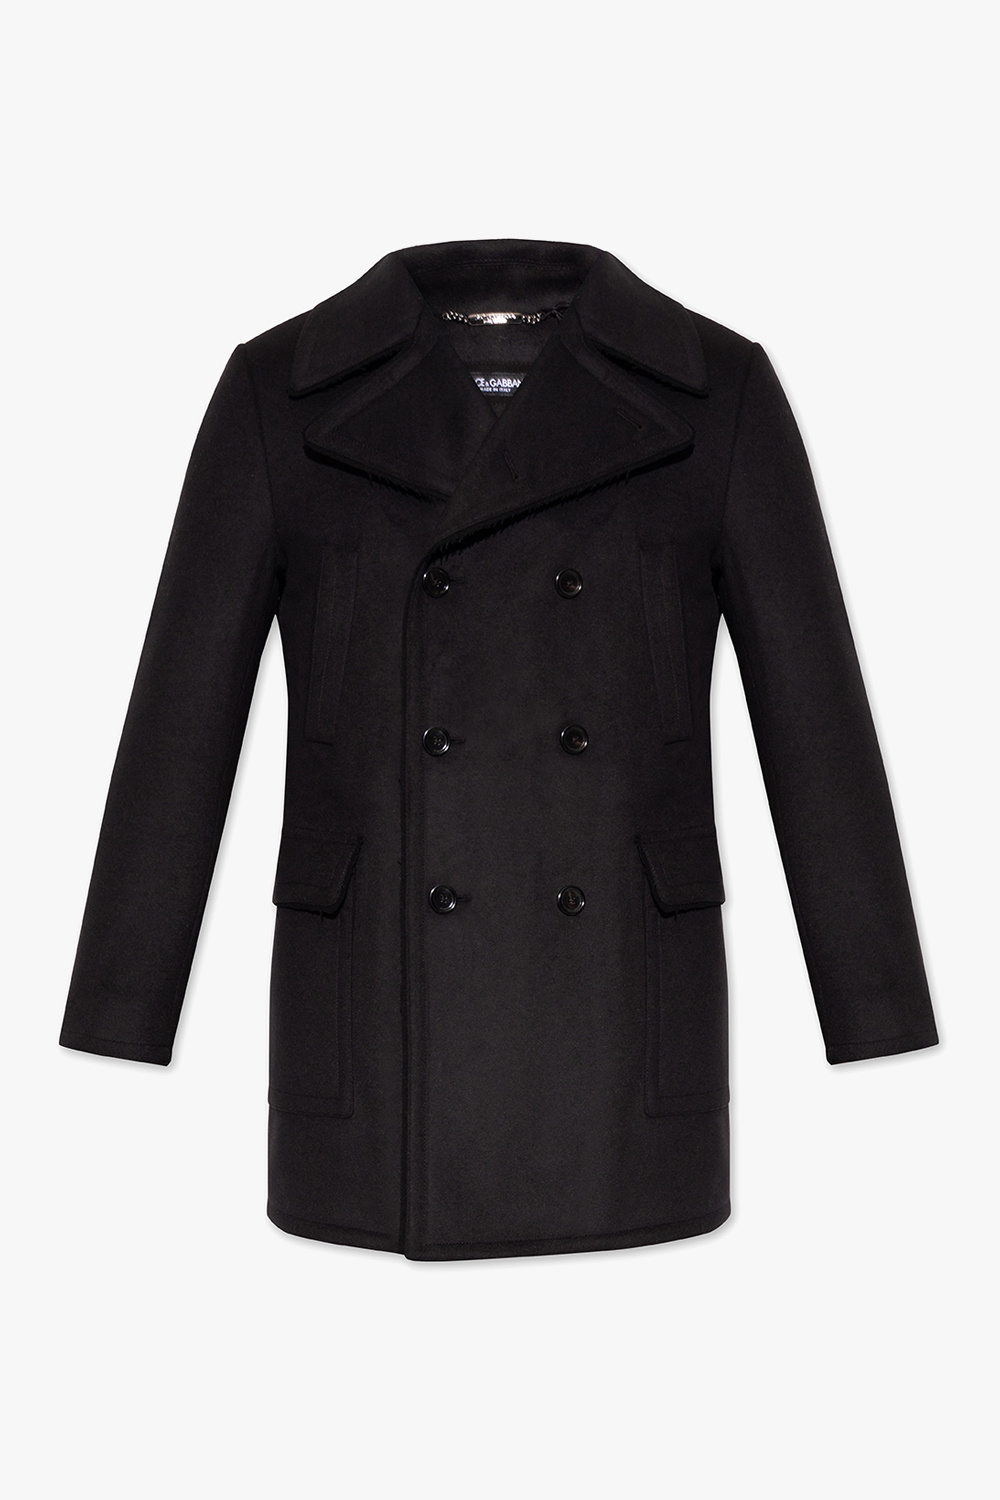 Dolce & Gabbana Double-breasted coat